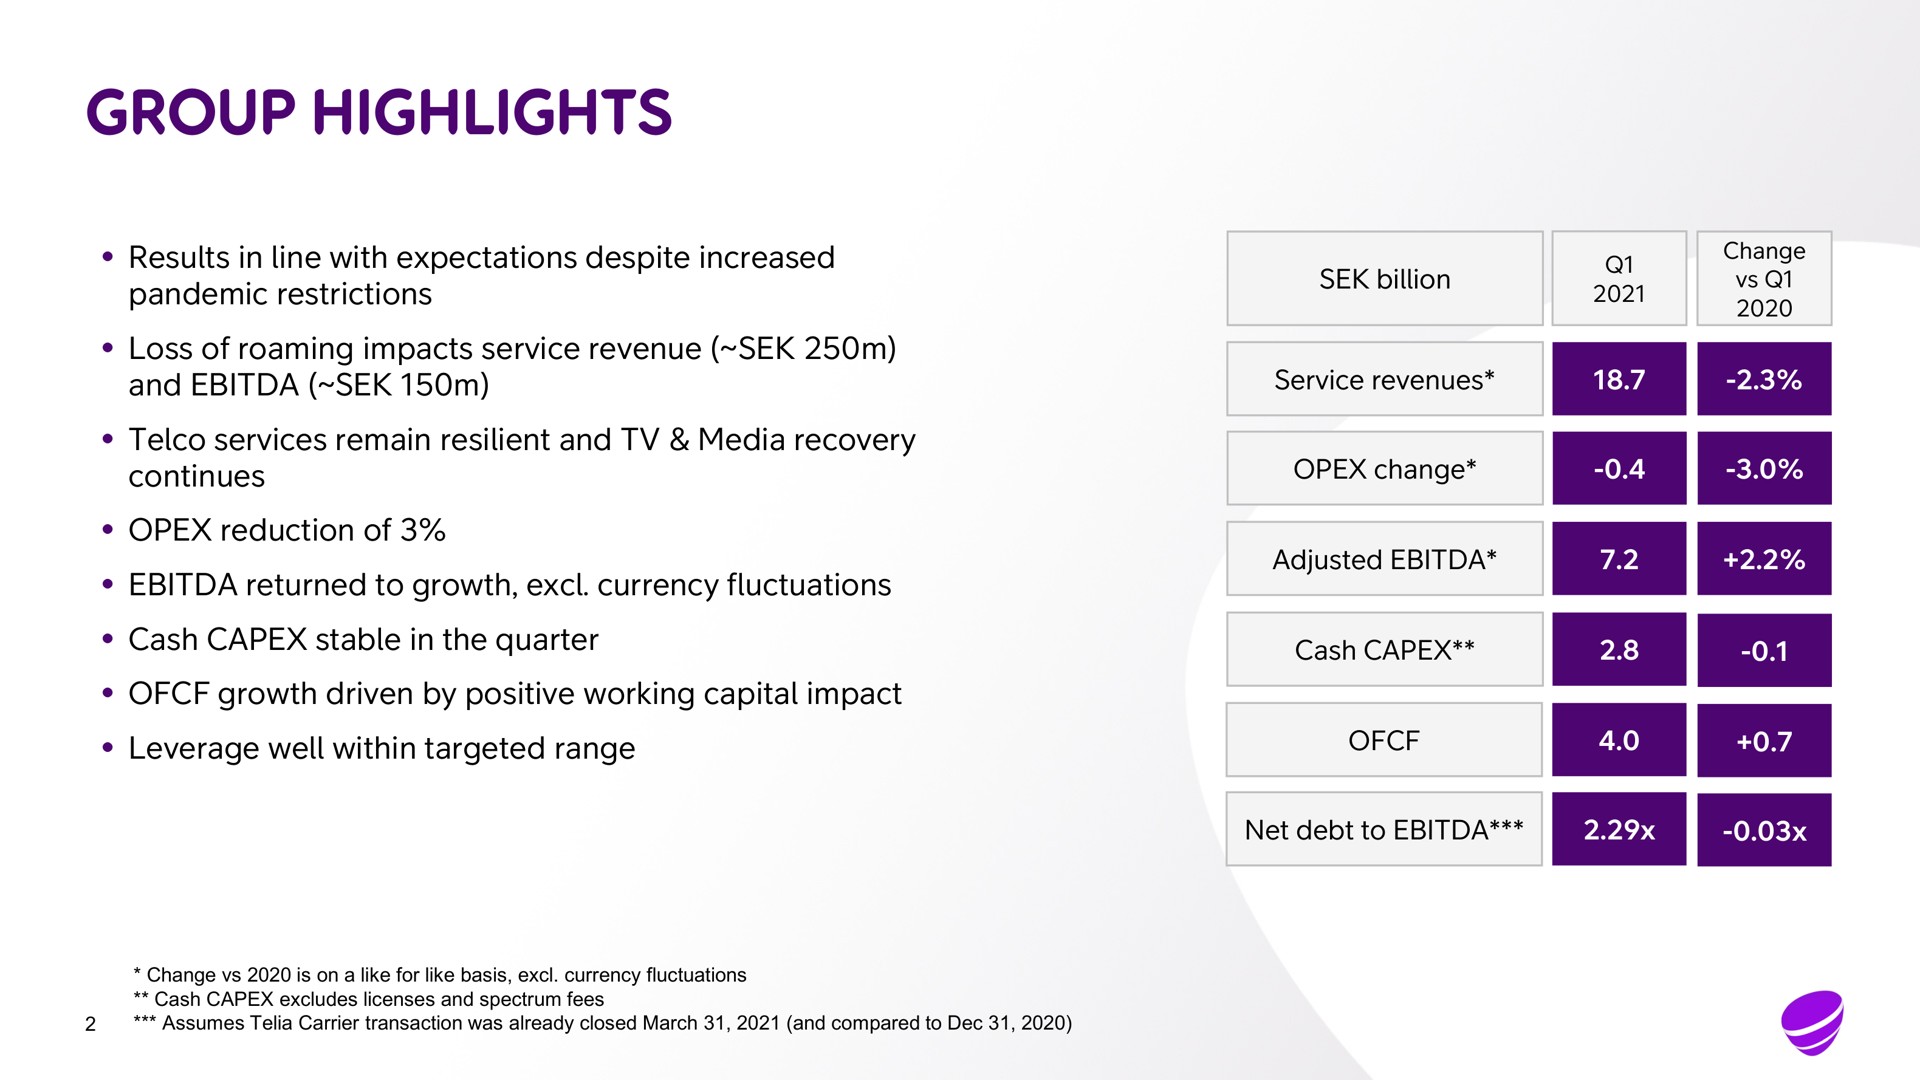 group highlights results in line with expectations despite increased pandemic restrictions loss of roaming impacts service revenue and services remain resilient and media recovery continues reduction of returned to growth currency fluctuations cash stable in the quarter growth driven by positive working capital impact leverage well within targeted range billion service revenues change adjusted cash net debt to a a | Telia Company